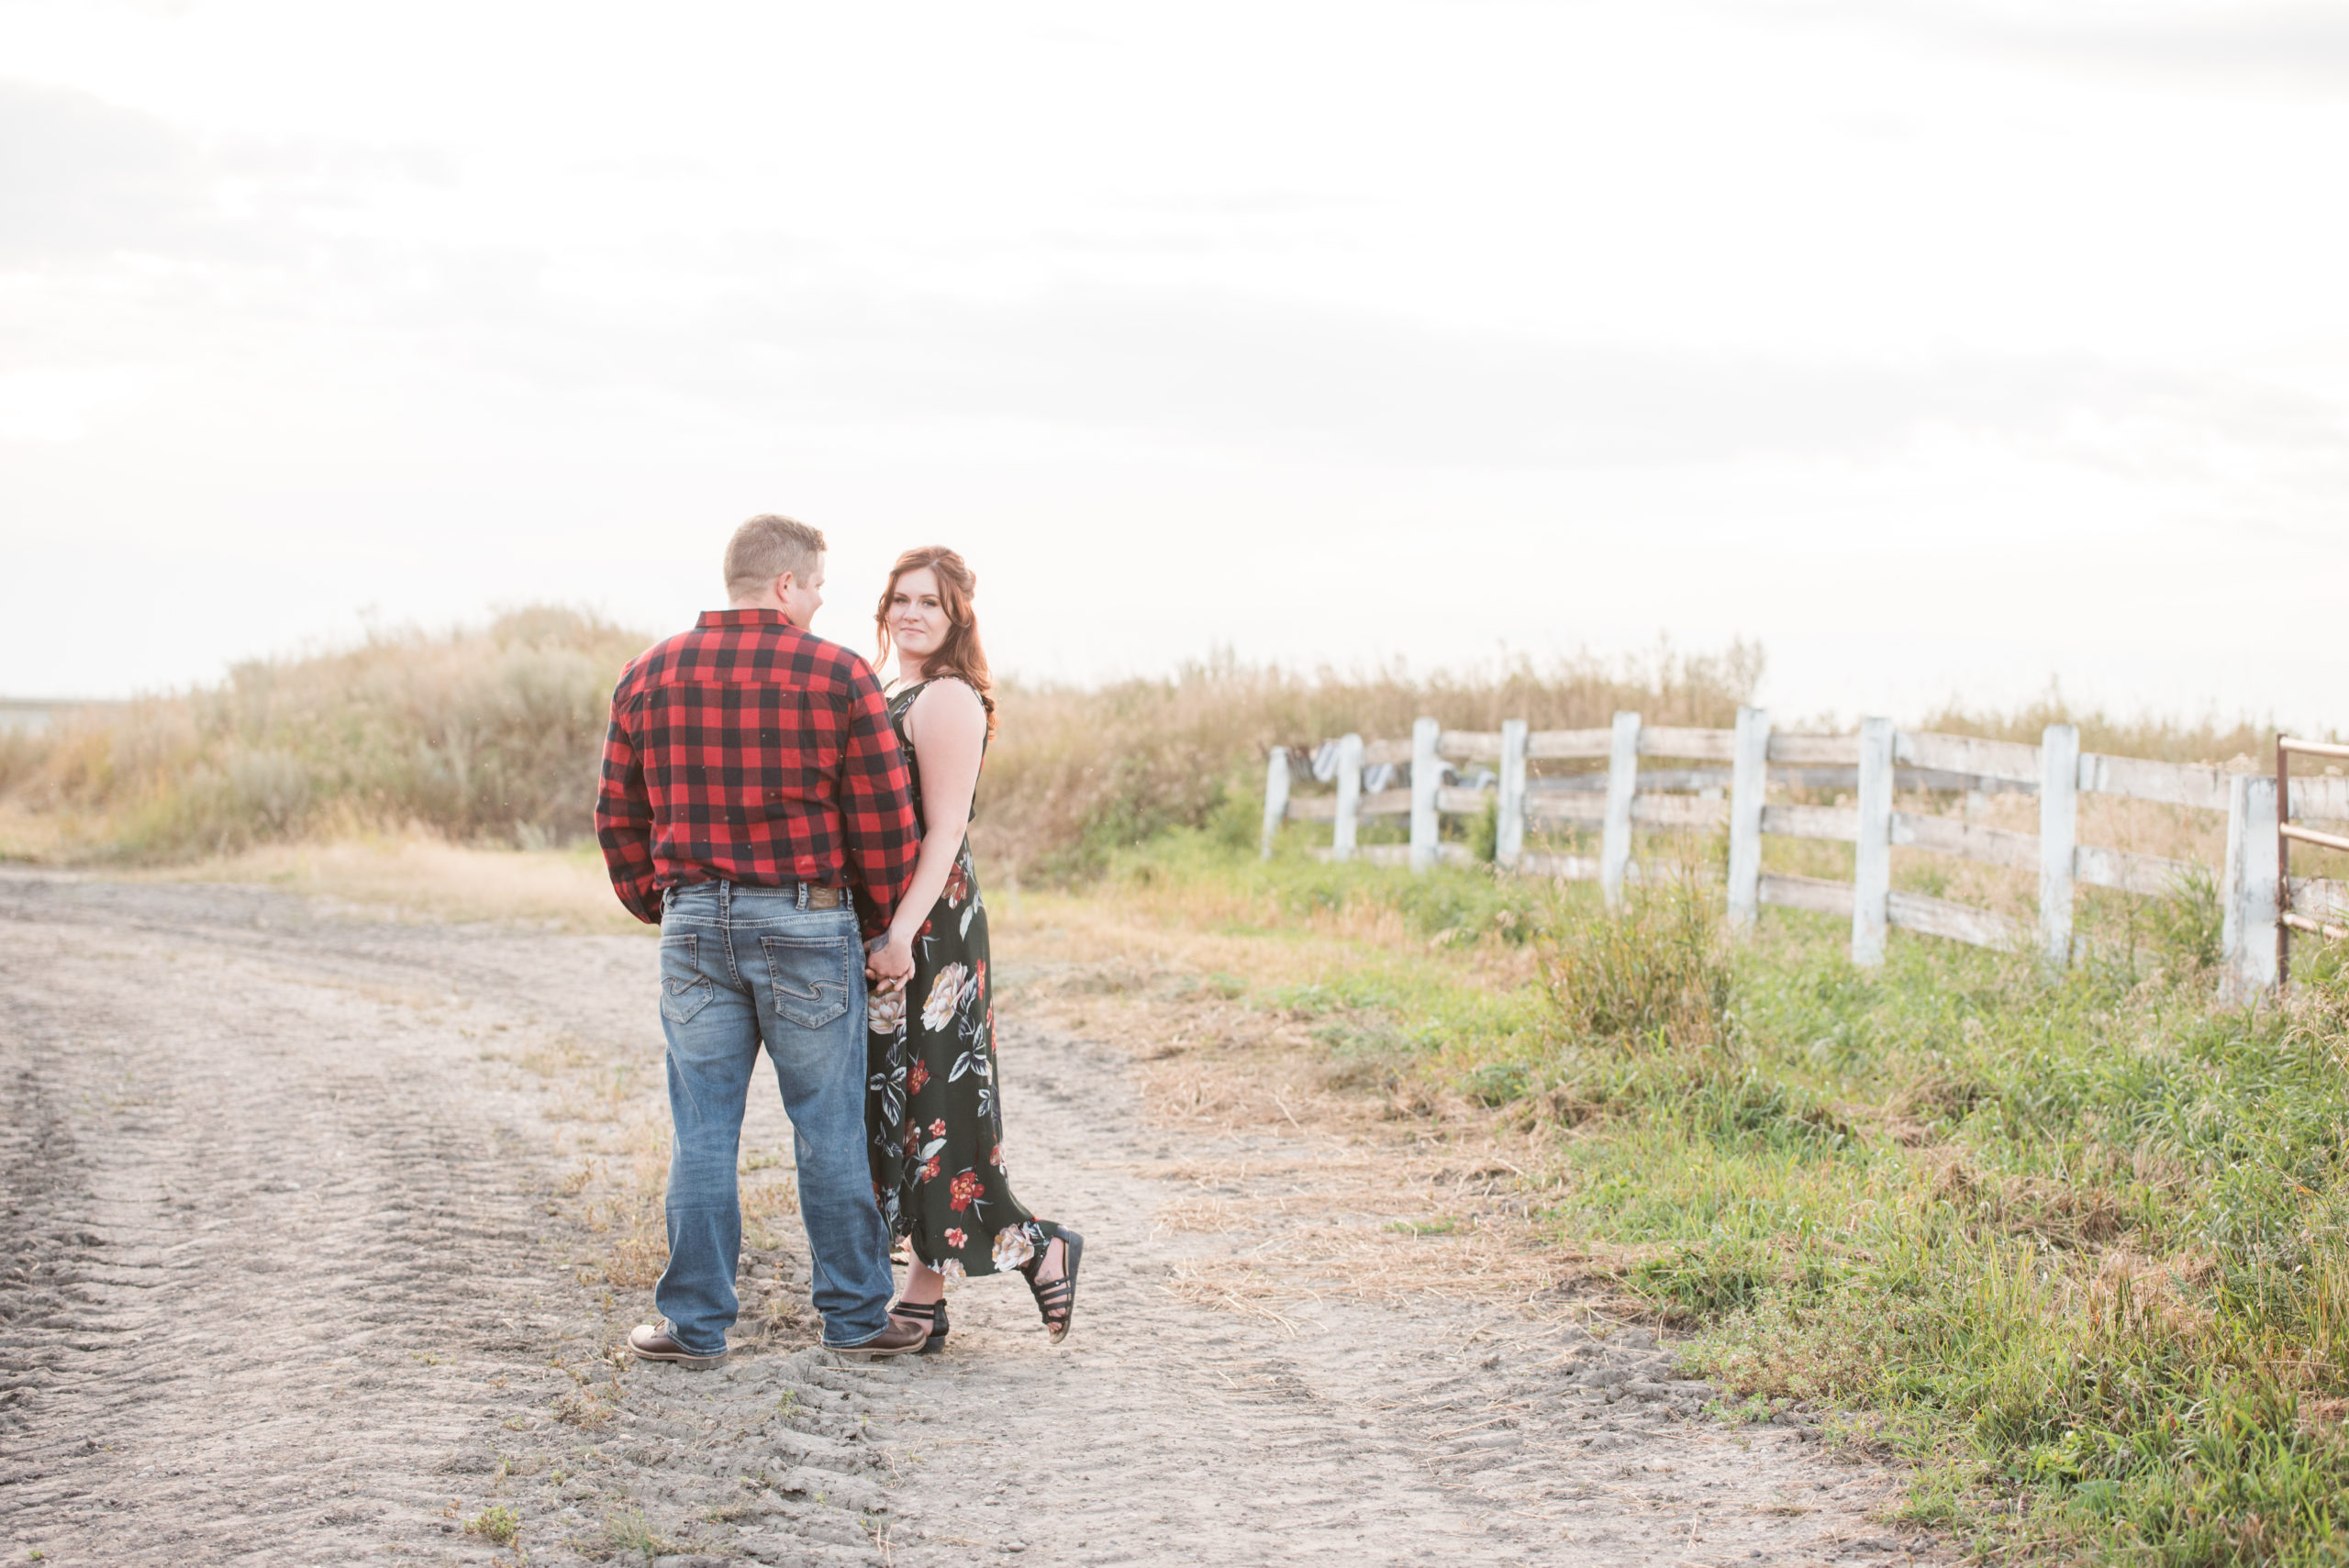 Sunset Engagement session farm. Making engagement session personal.